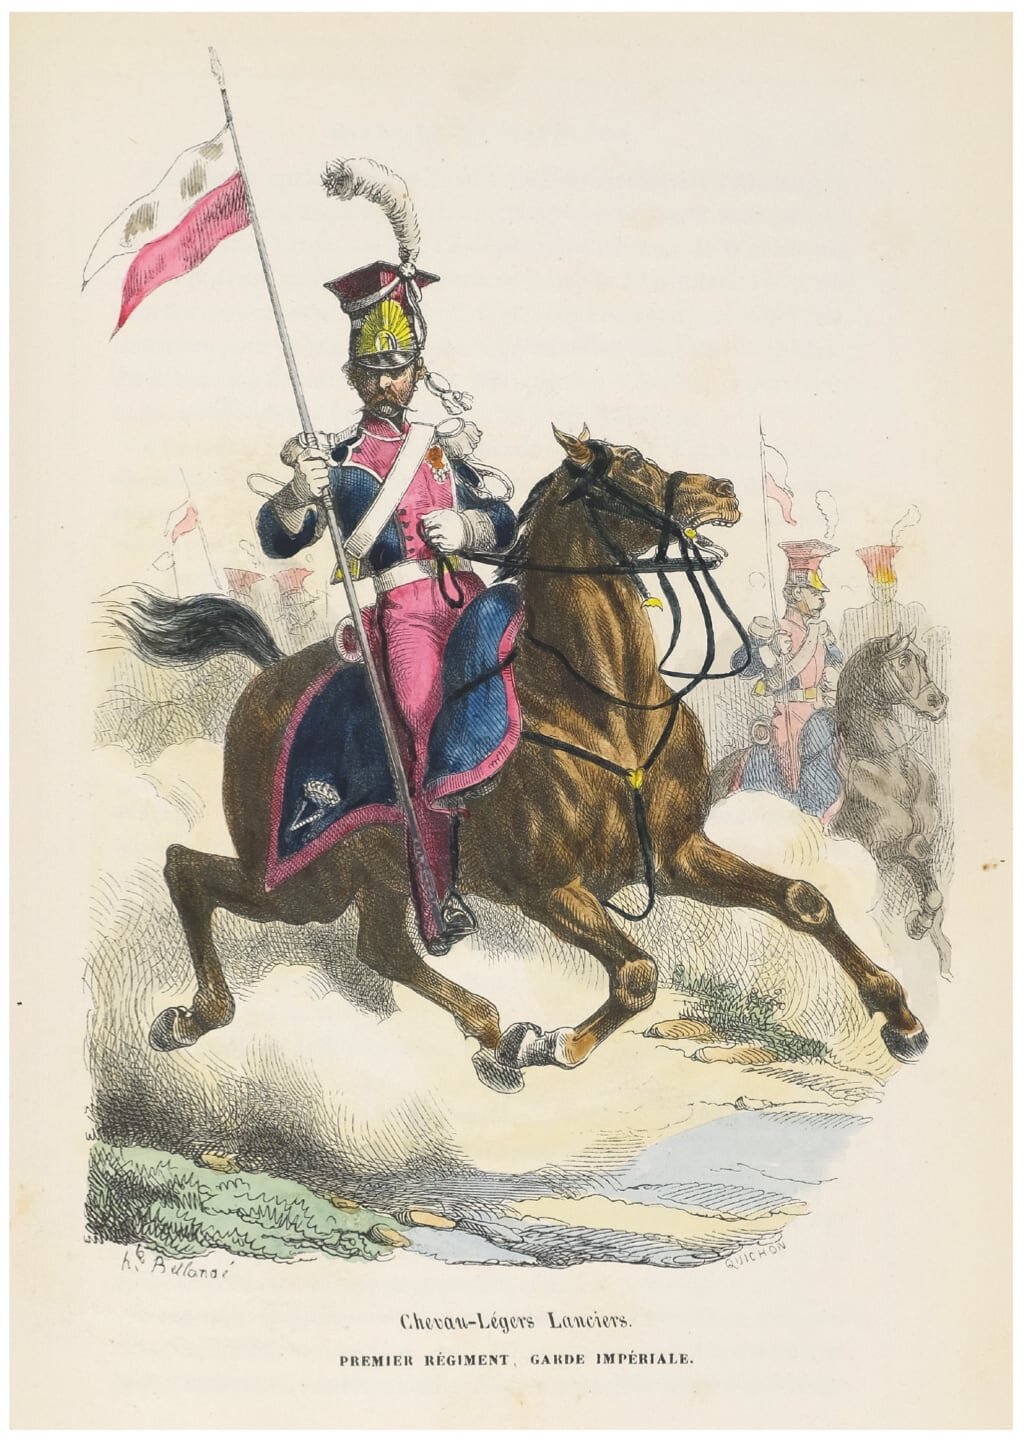  The second edition from 1843 [no. 390] with 44 coloured plates as well as a watercolour by Bellangé, and the watercolour model for the book’s frontispiece 